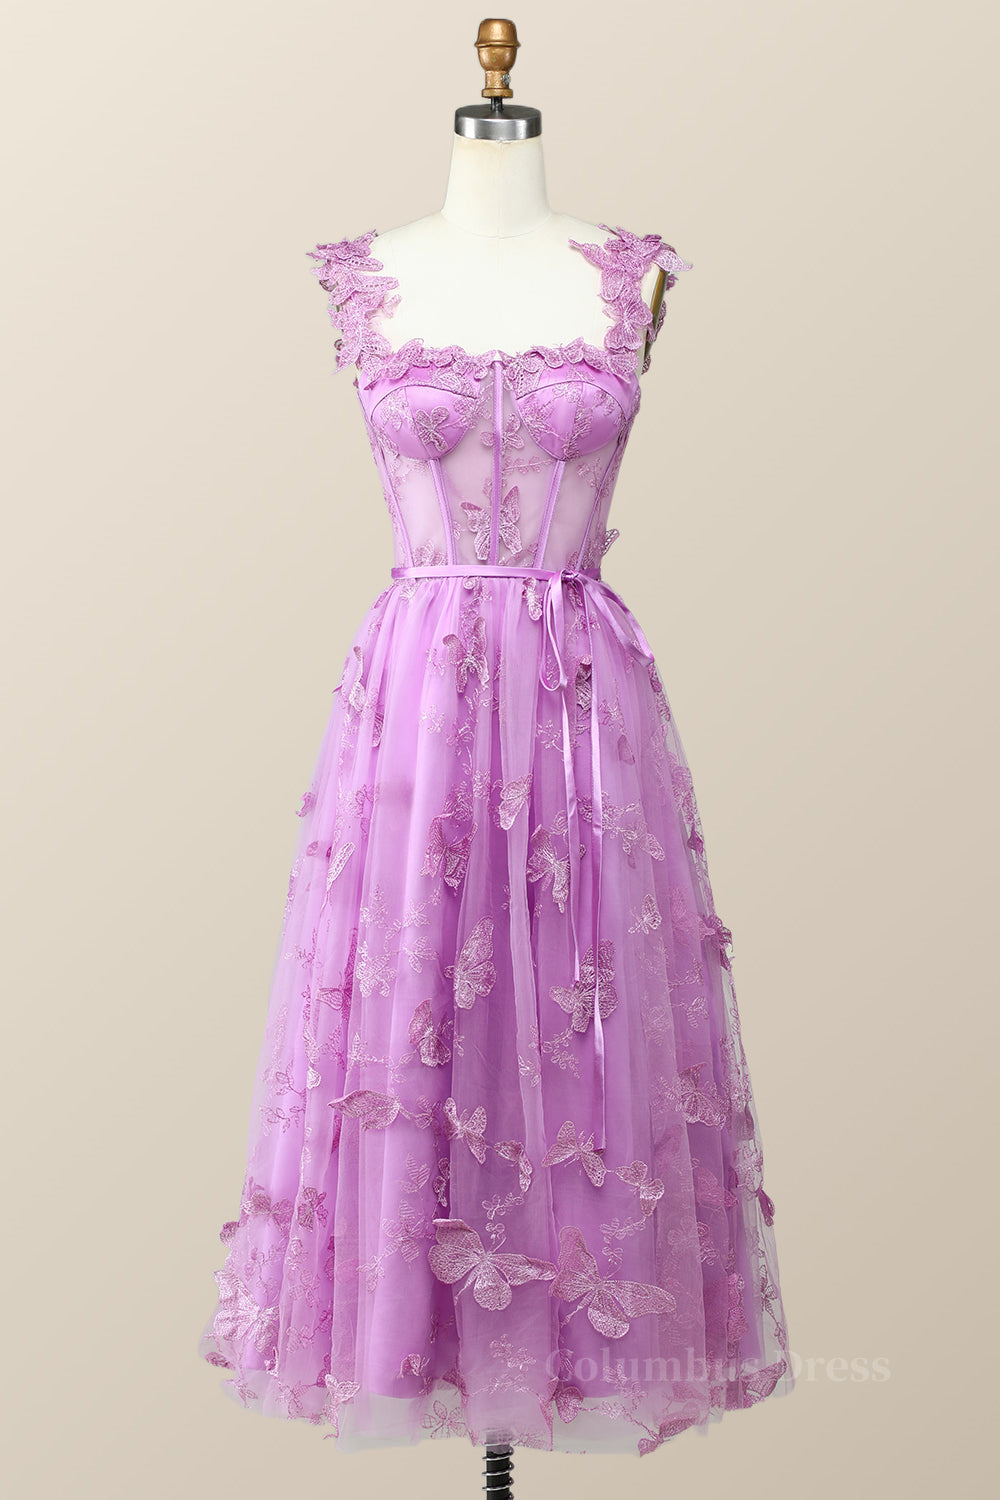 Lilac Butterfly Tulle A-line Midi Corset Homecoming Dress outfit, Wedding Pictures